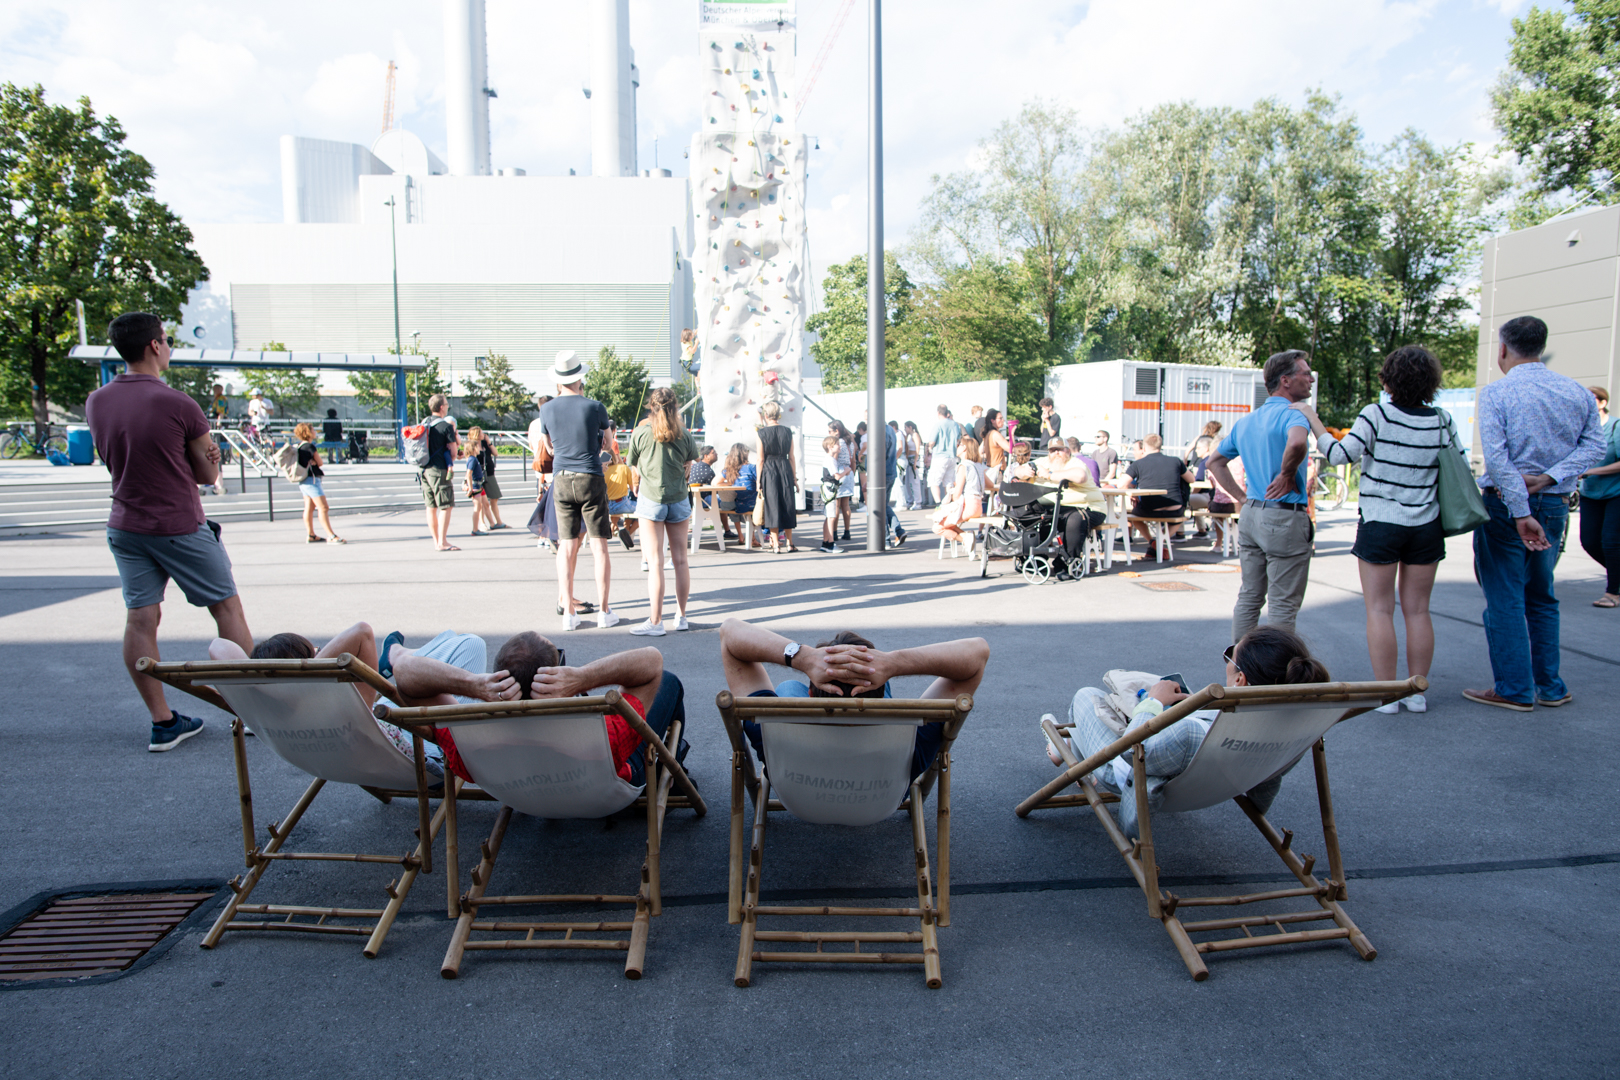 People lying in deck chairs with a view of the cogeneration plant